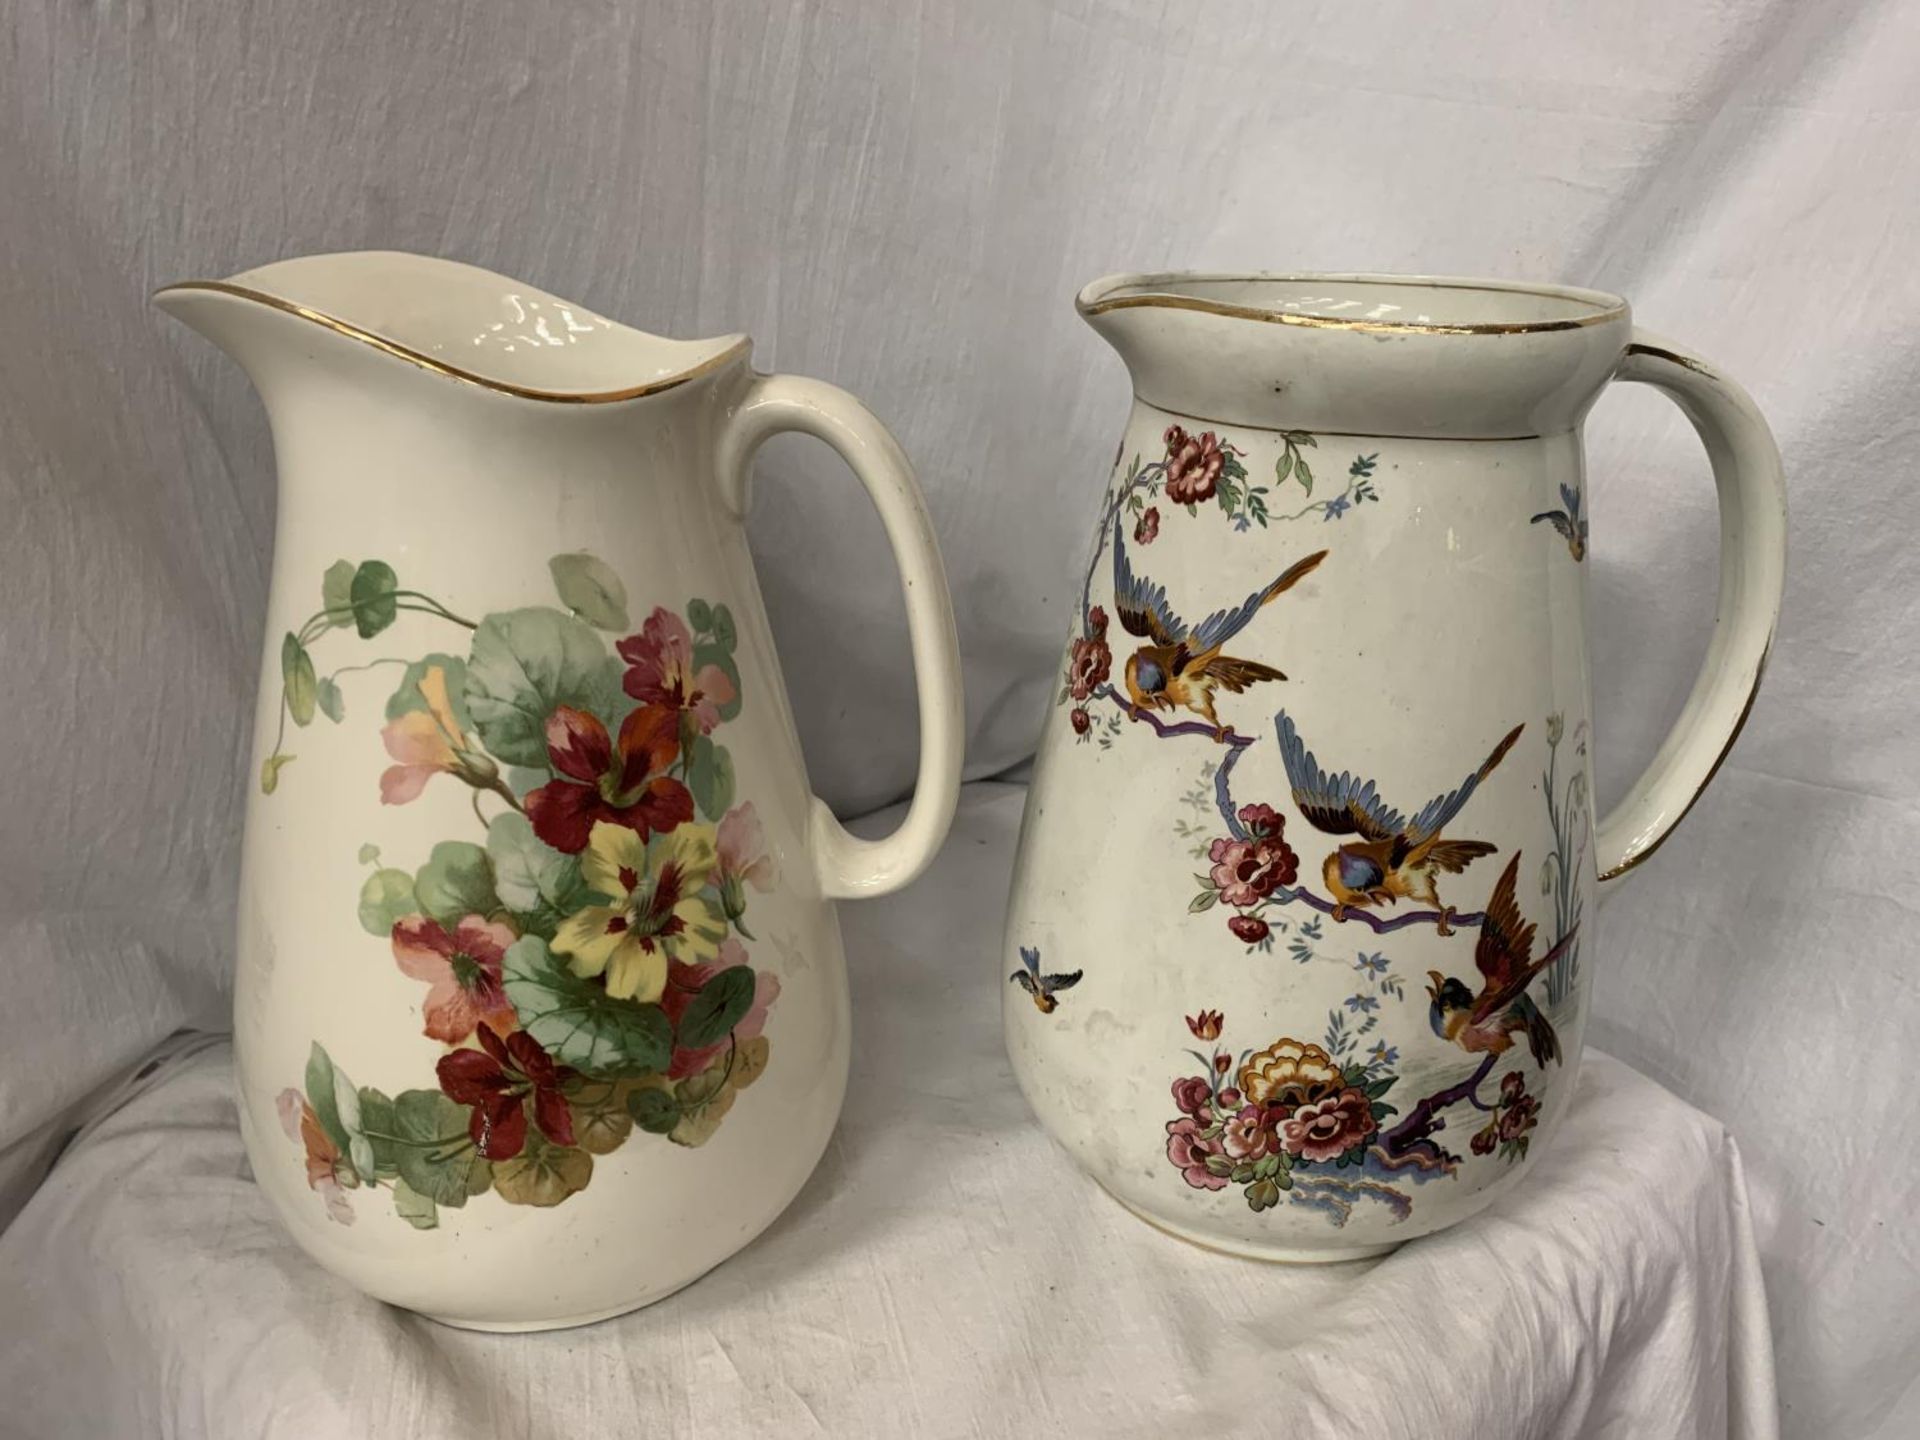 TWO LARGE CERAMIC JUGS ONE WITH FLORAL DECORATION, THE OTHER PEARL POTTERY WITH AVIAN DESIGN H: 31CM